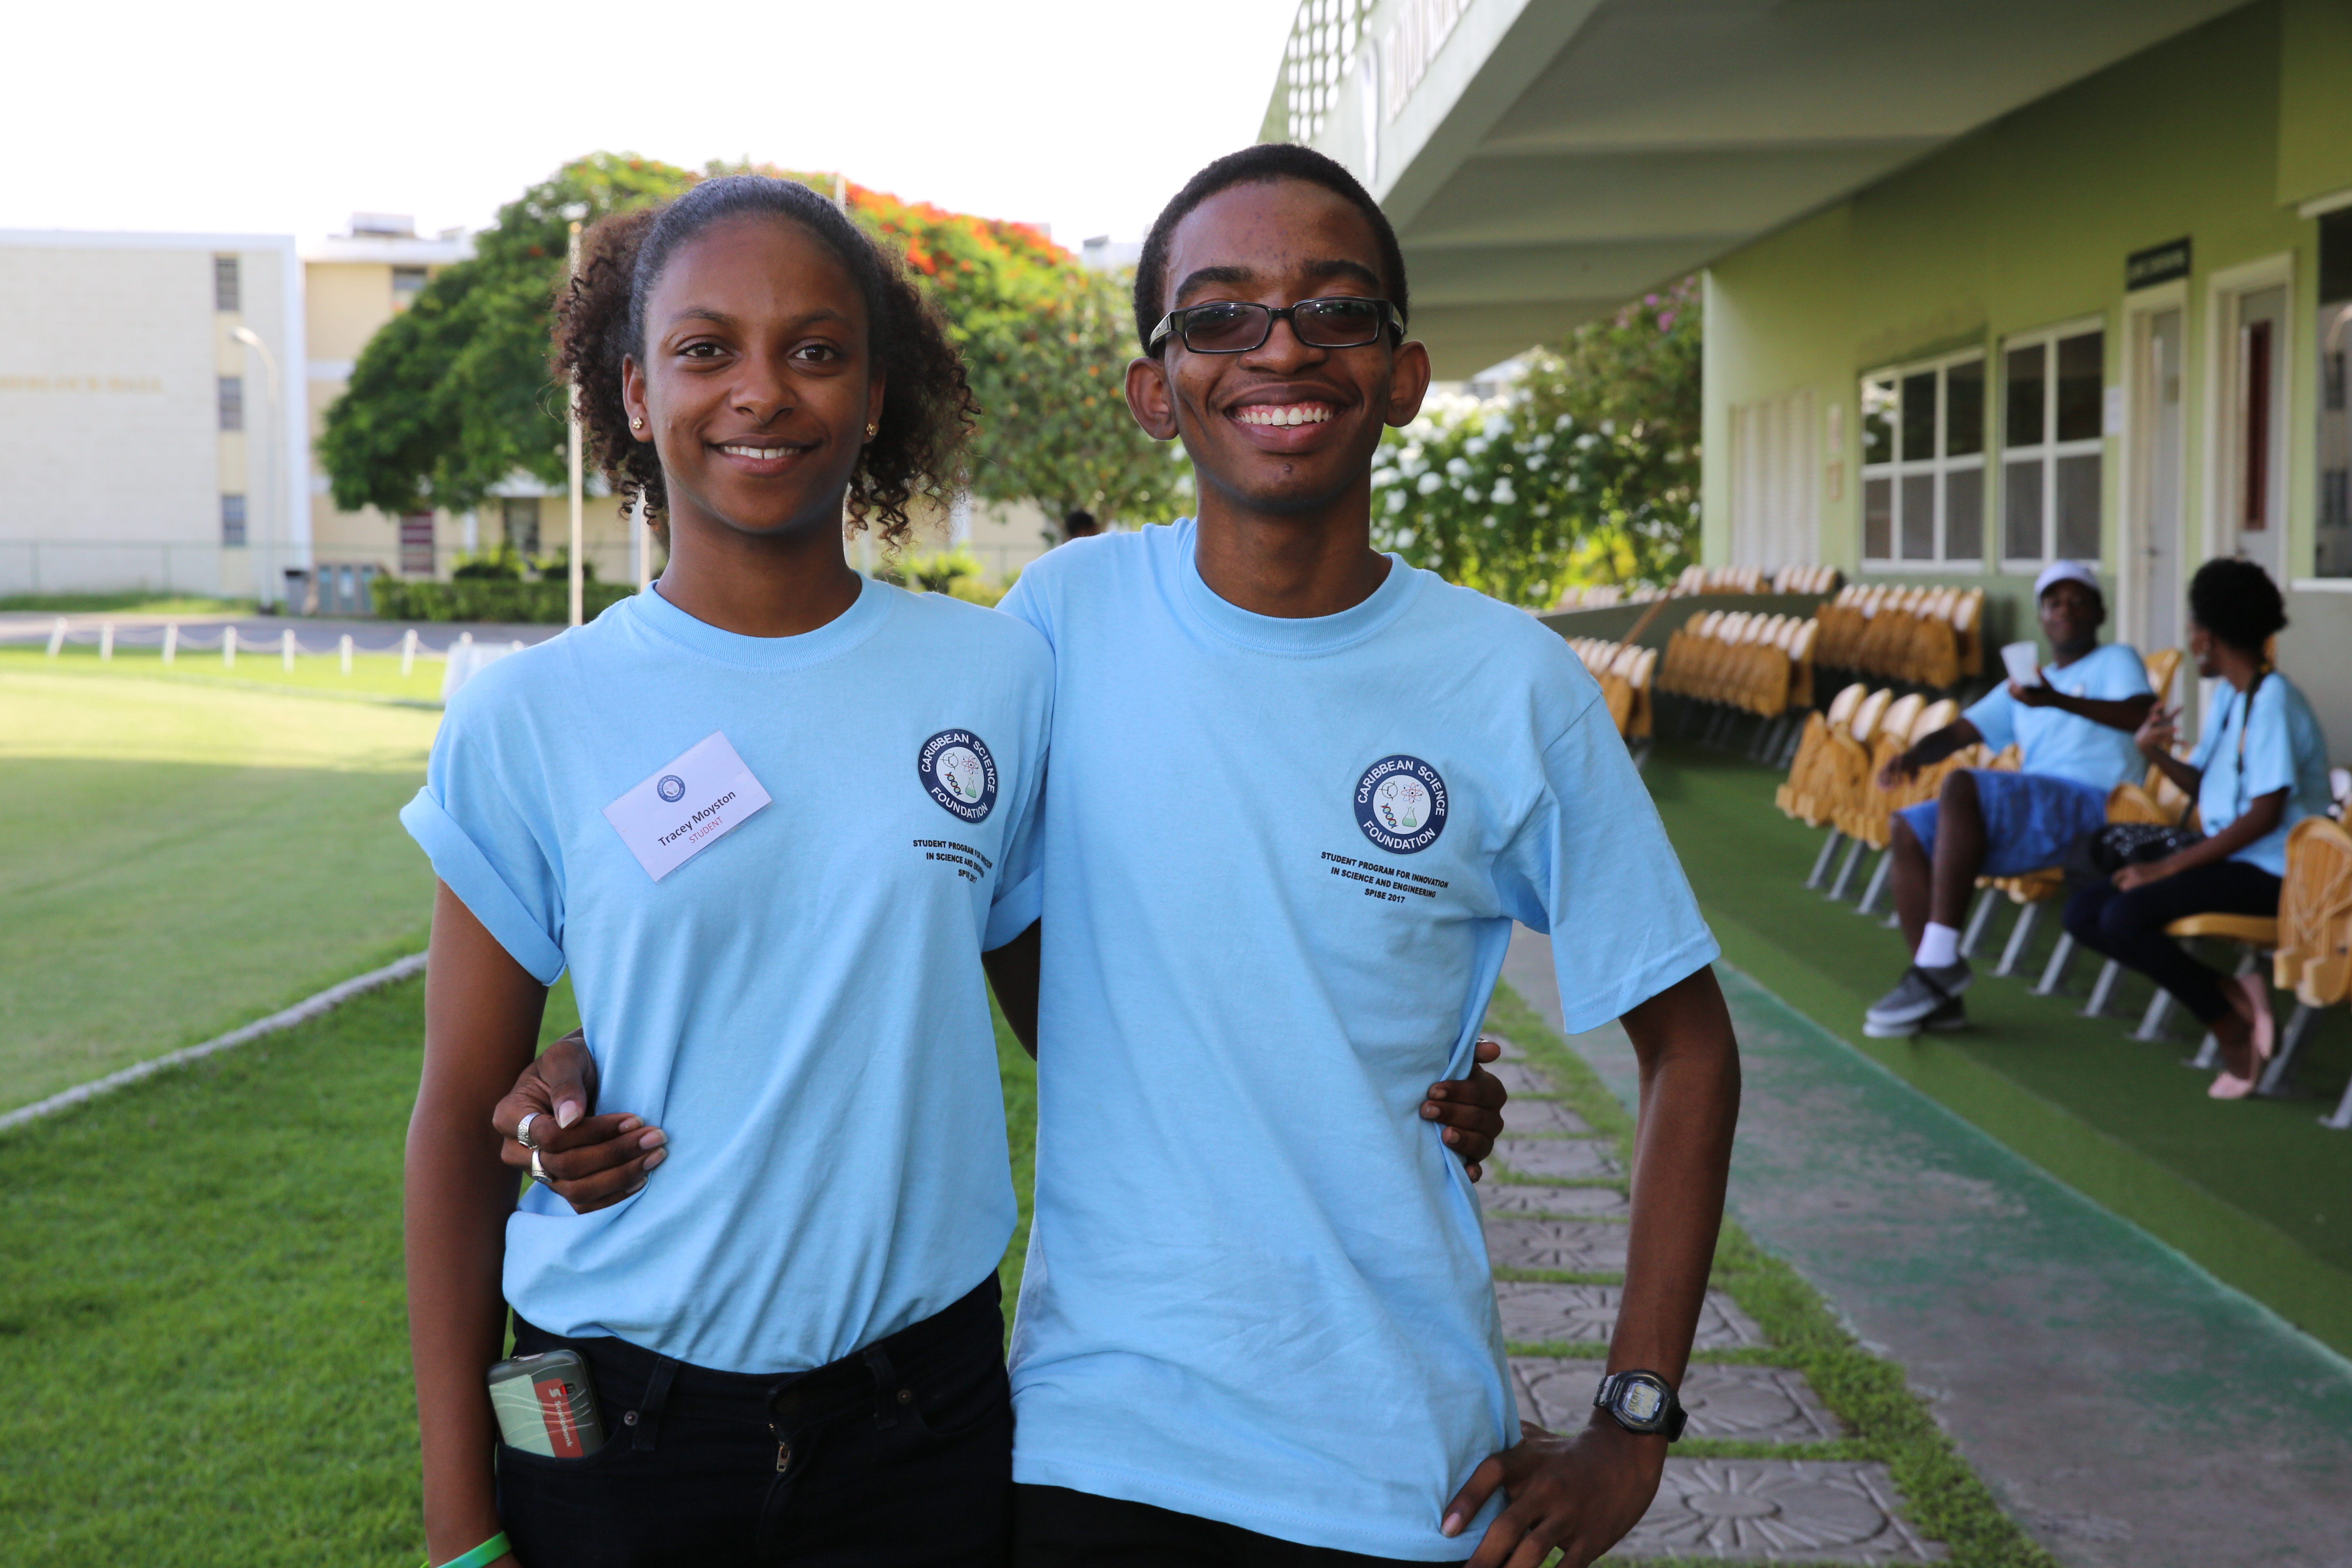 CDB-sponsored SPISE students, Tracey Moyston, from Saint Lucia, and Desmond Edwards from Jamaica.